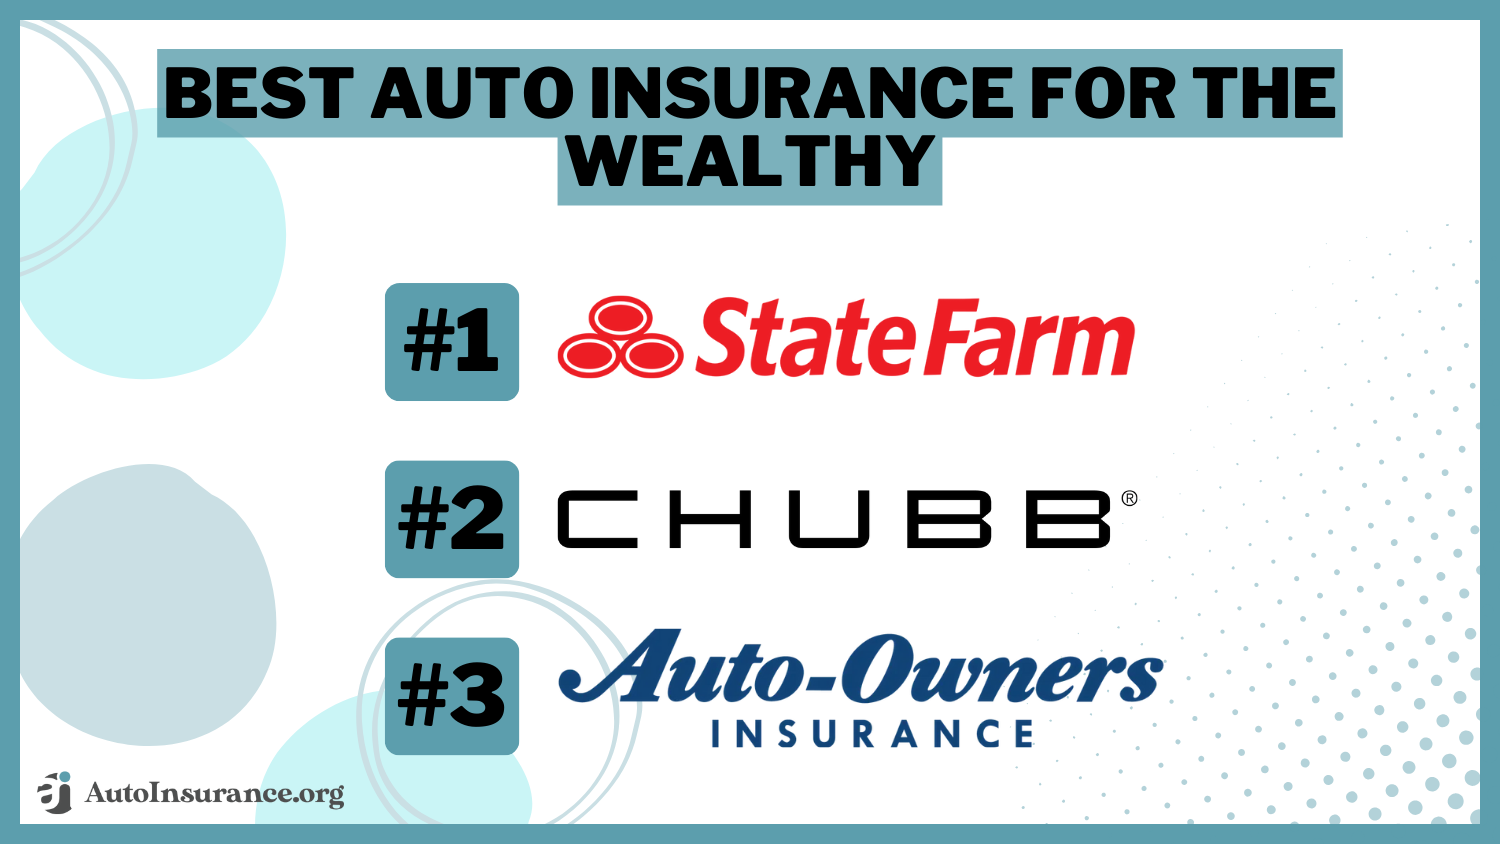 Best Auto Insurance for the Wealthy: State Farm, Chubb, Auto-Owners